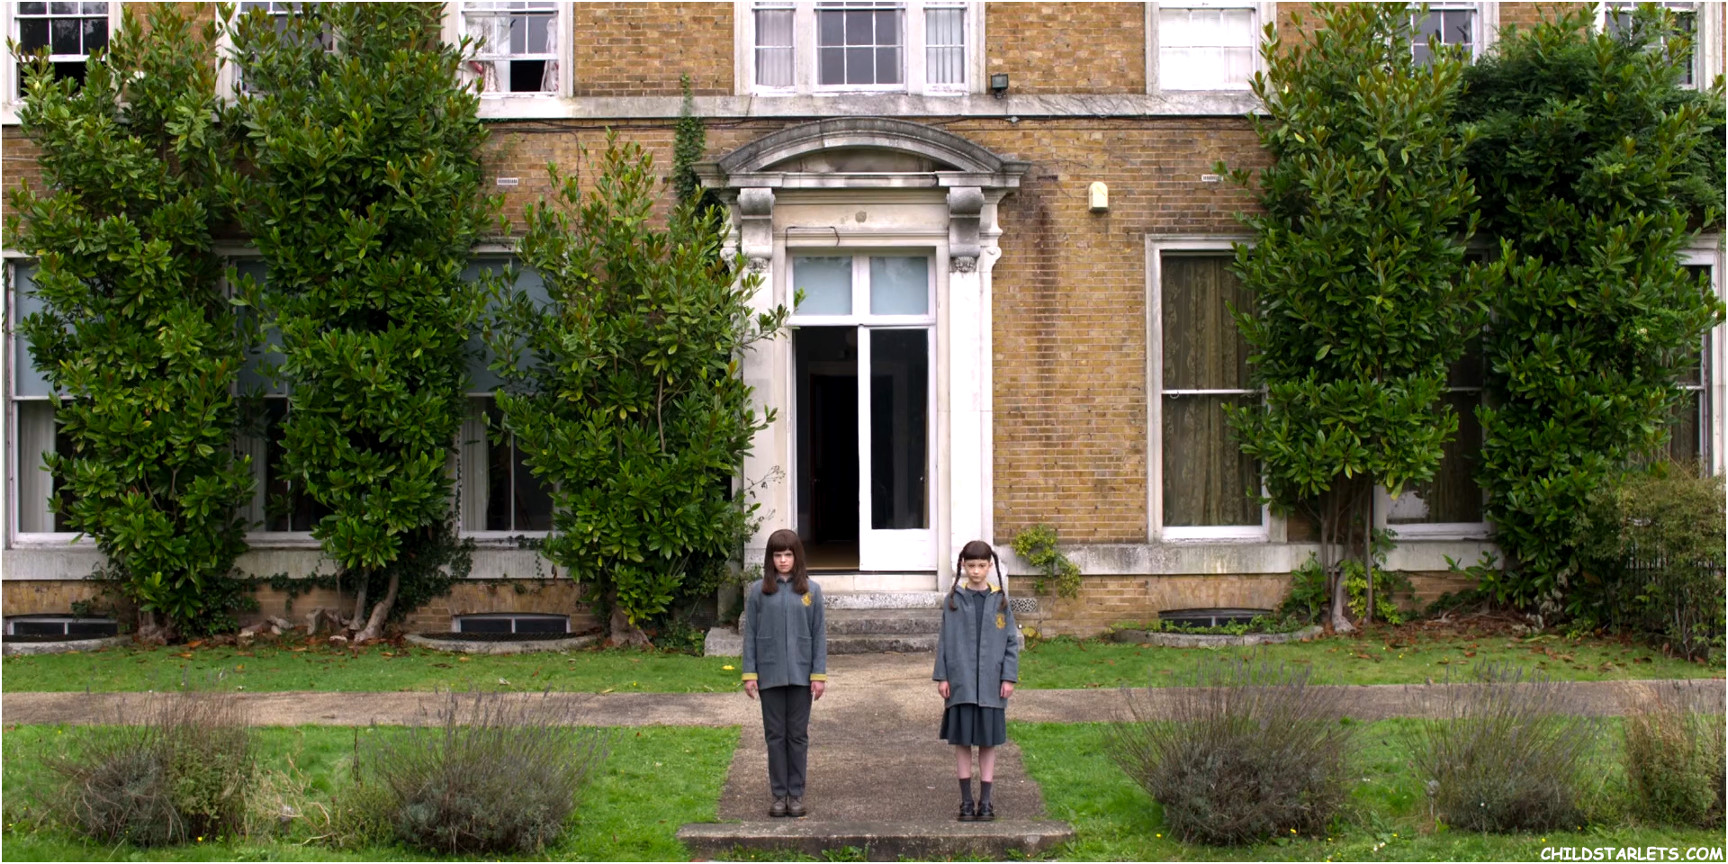 Indica Watson / Georgia Thorne "The Midwich Cuckoos" - 2022/HD
"Departure"